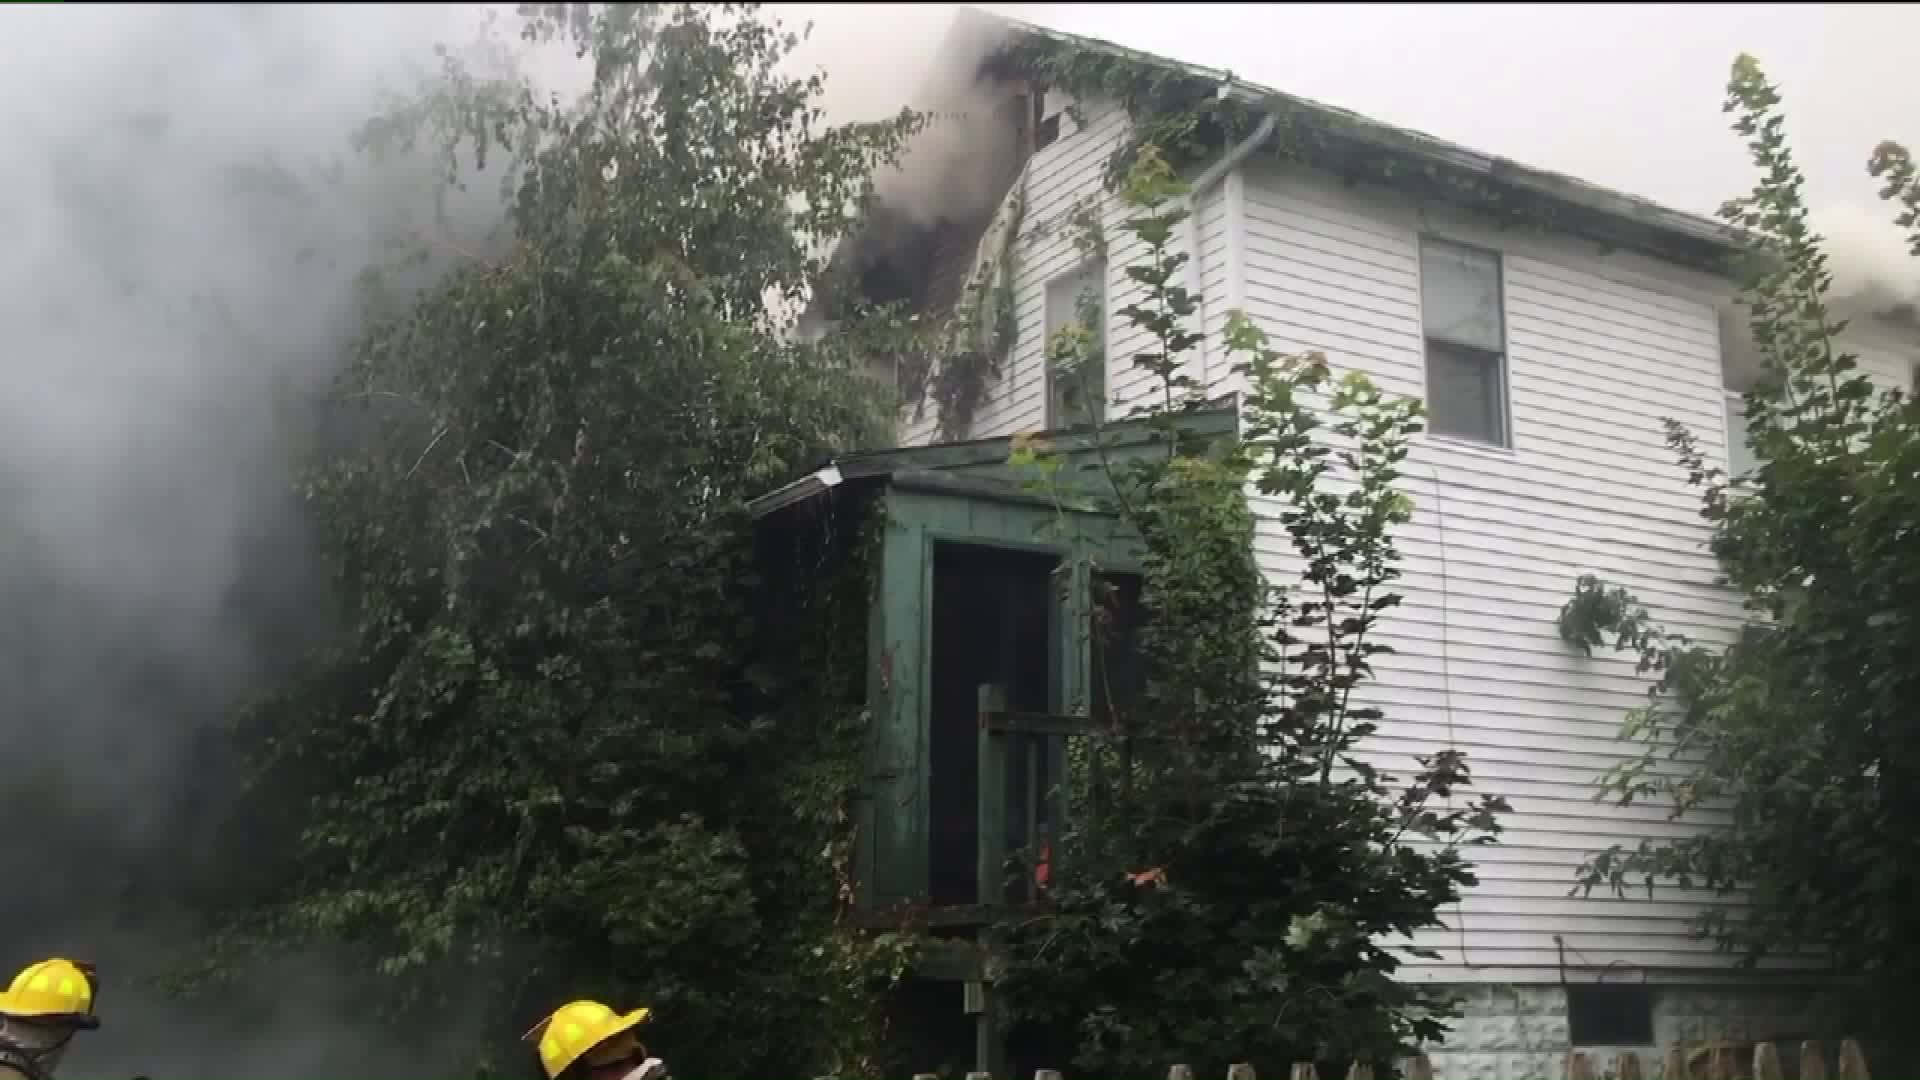 Fire in Wilkes-Barre Ruled Arson